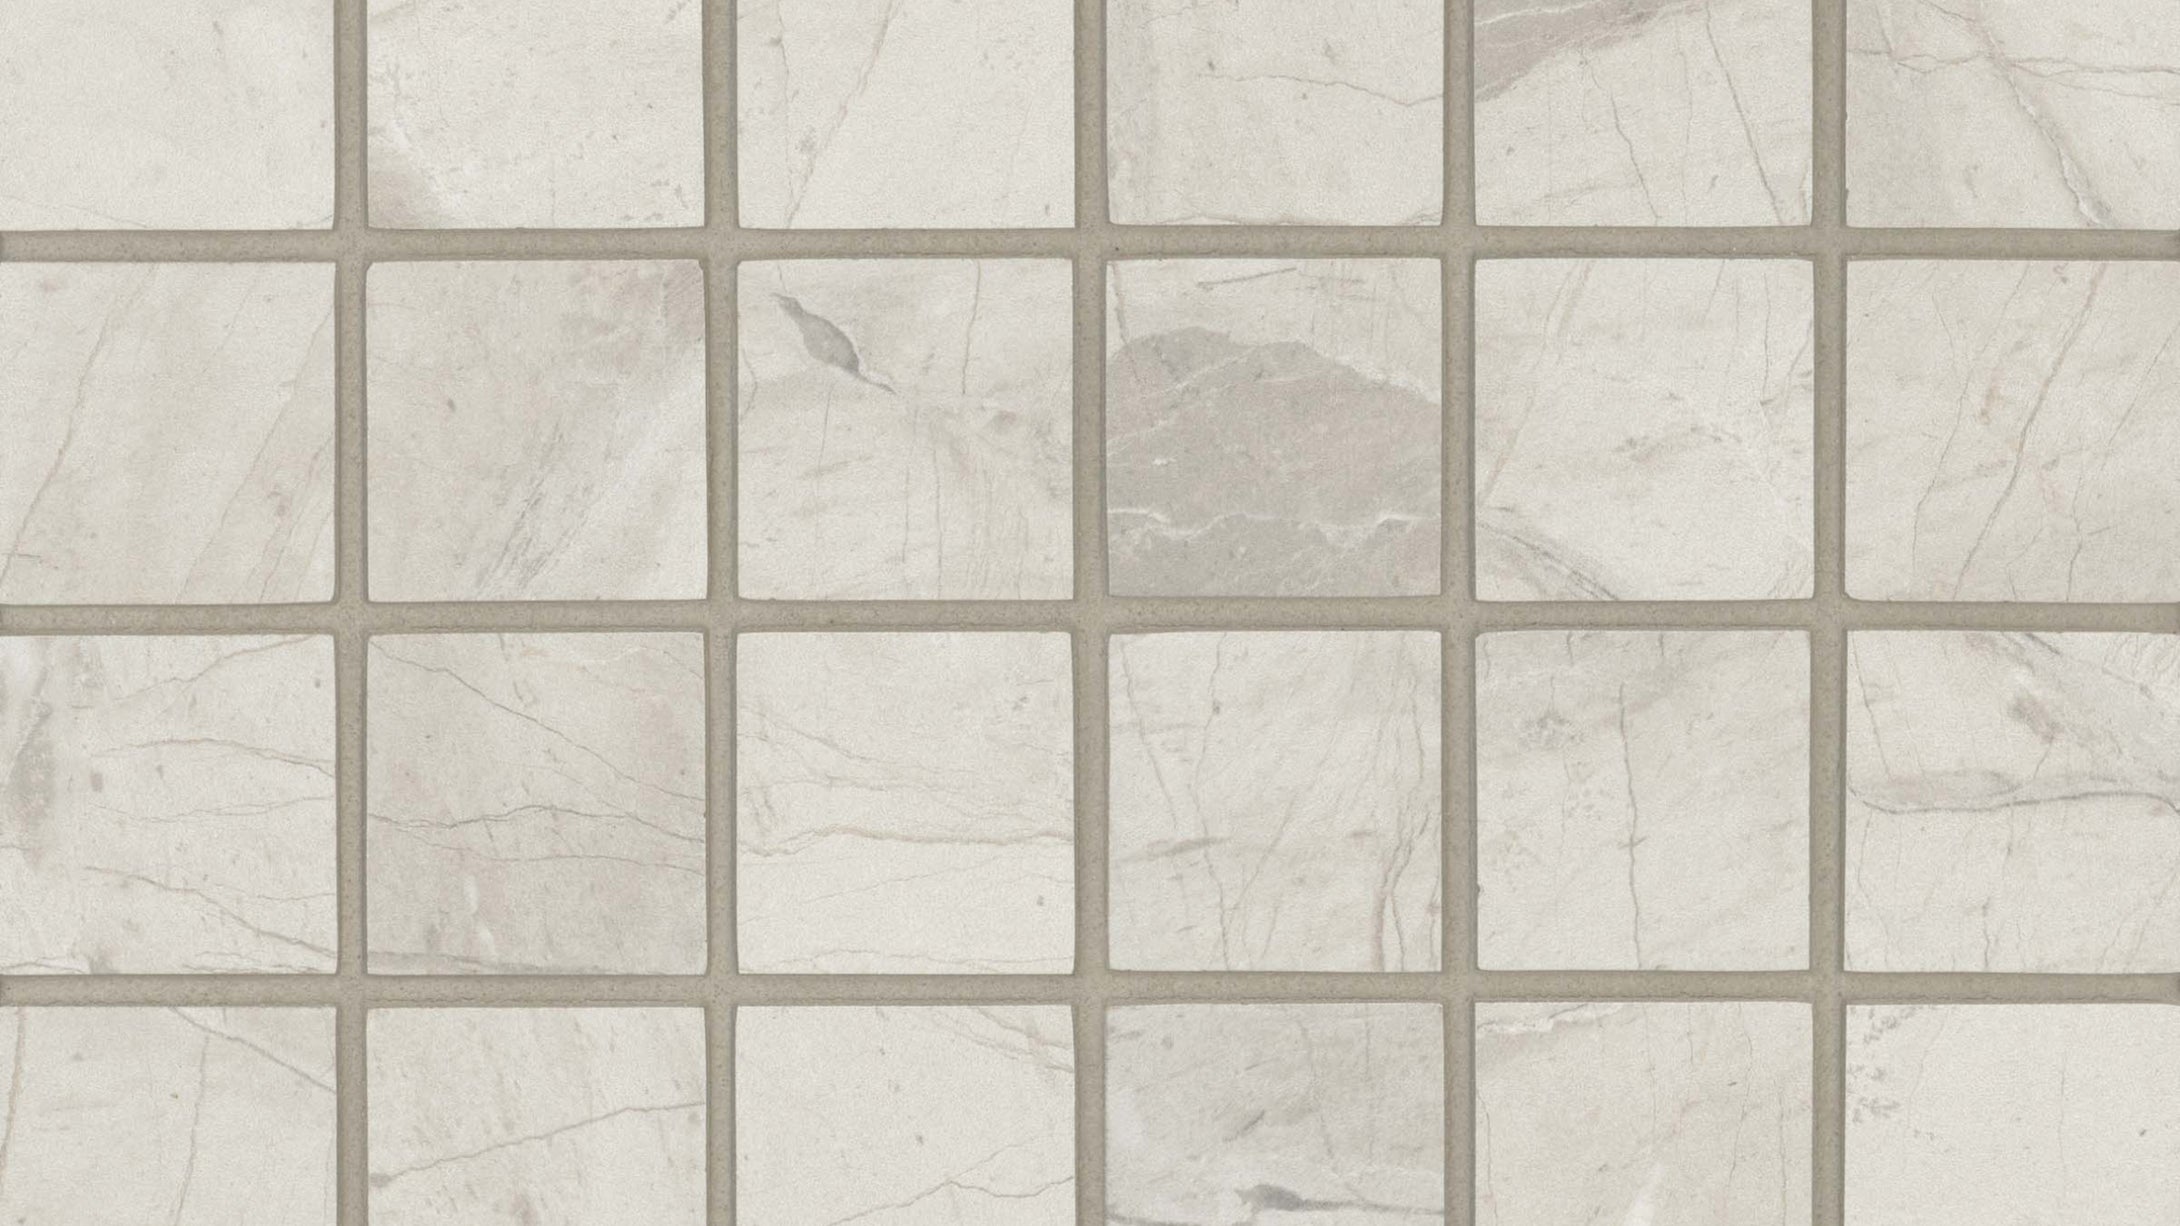 Tesoro Square Mosaic Tile, Sold by the Piece